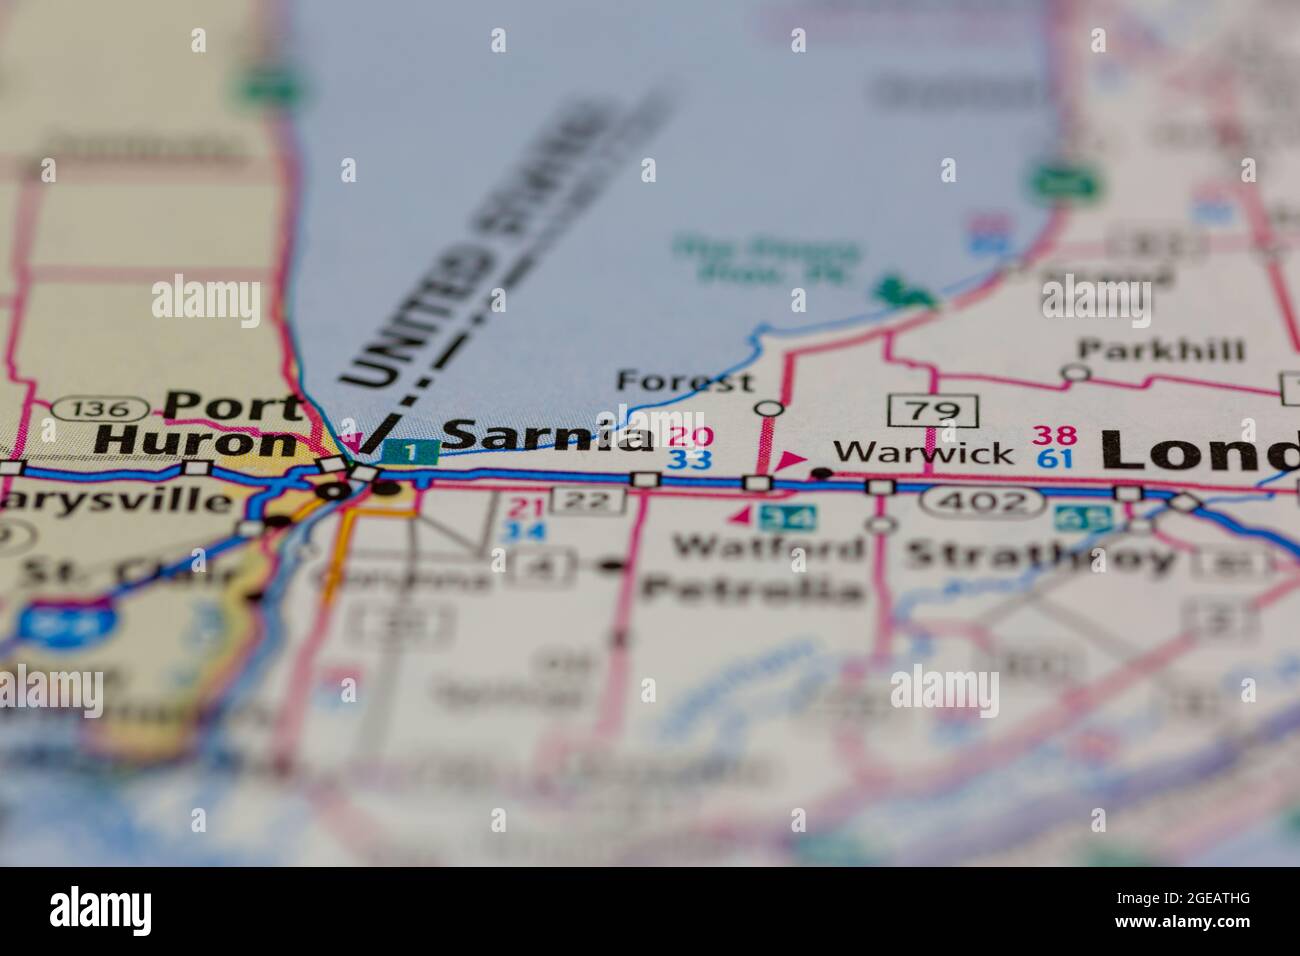 Sarnia Ontario Canada shown on a road map or Geography map Stock Photo